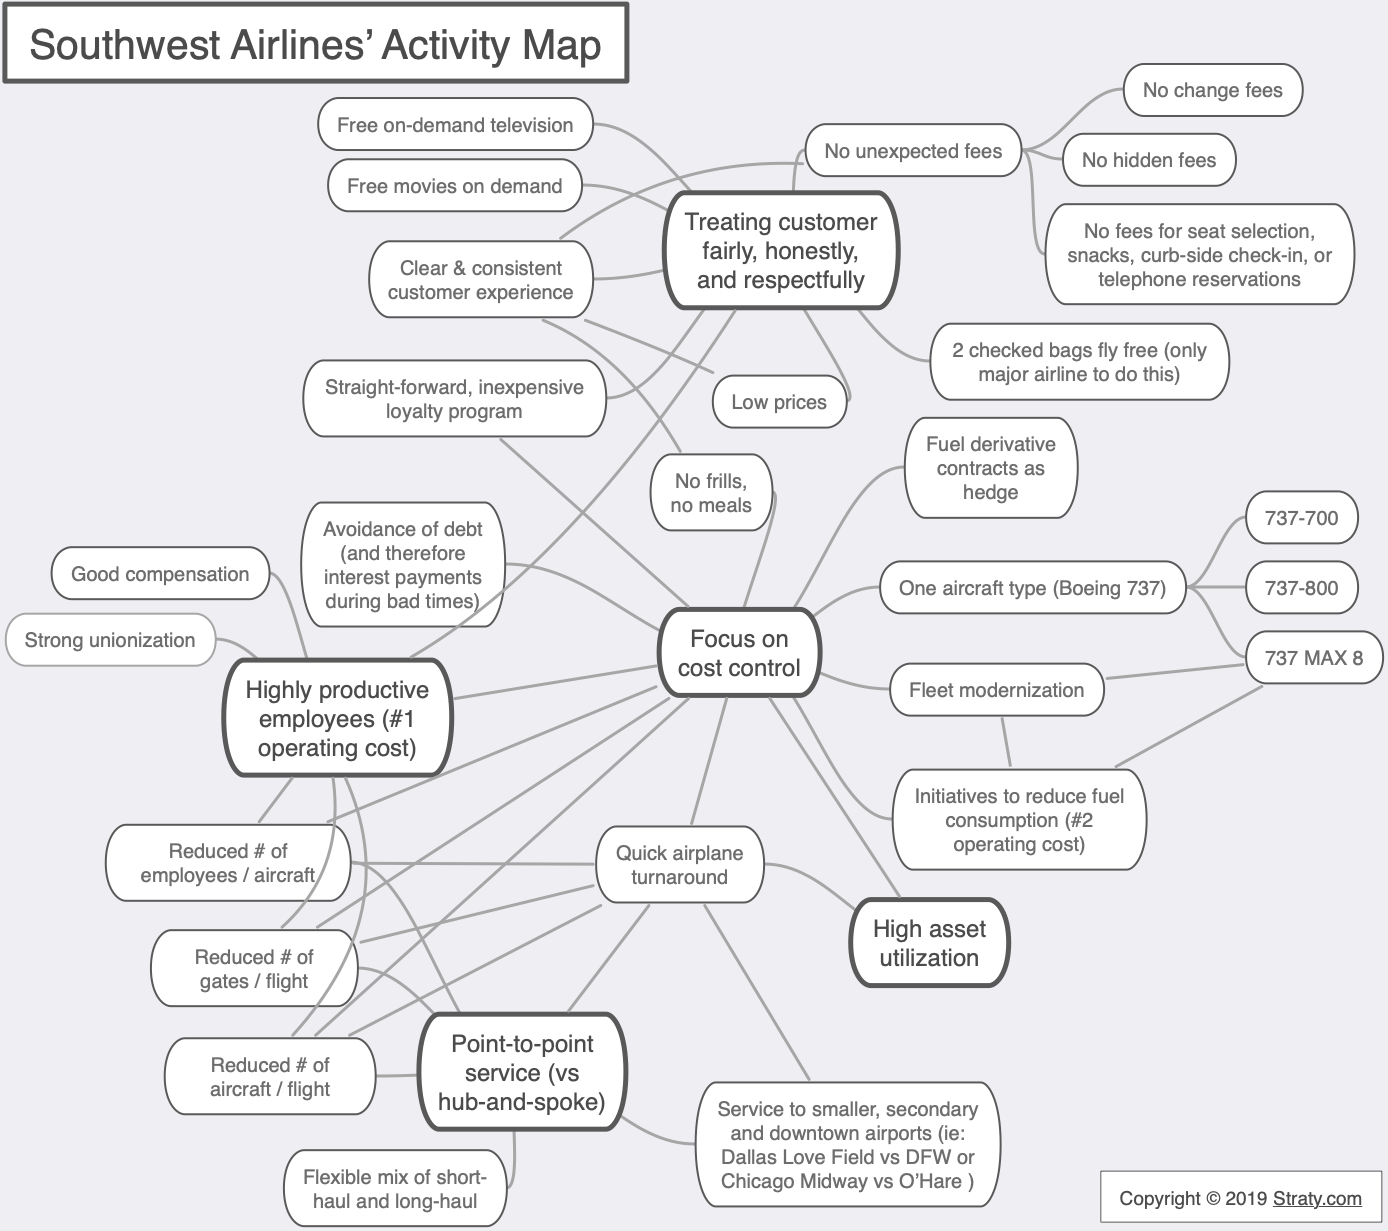 Southwest Airlines' Activity Map and Strategy